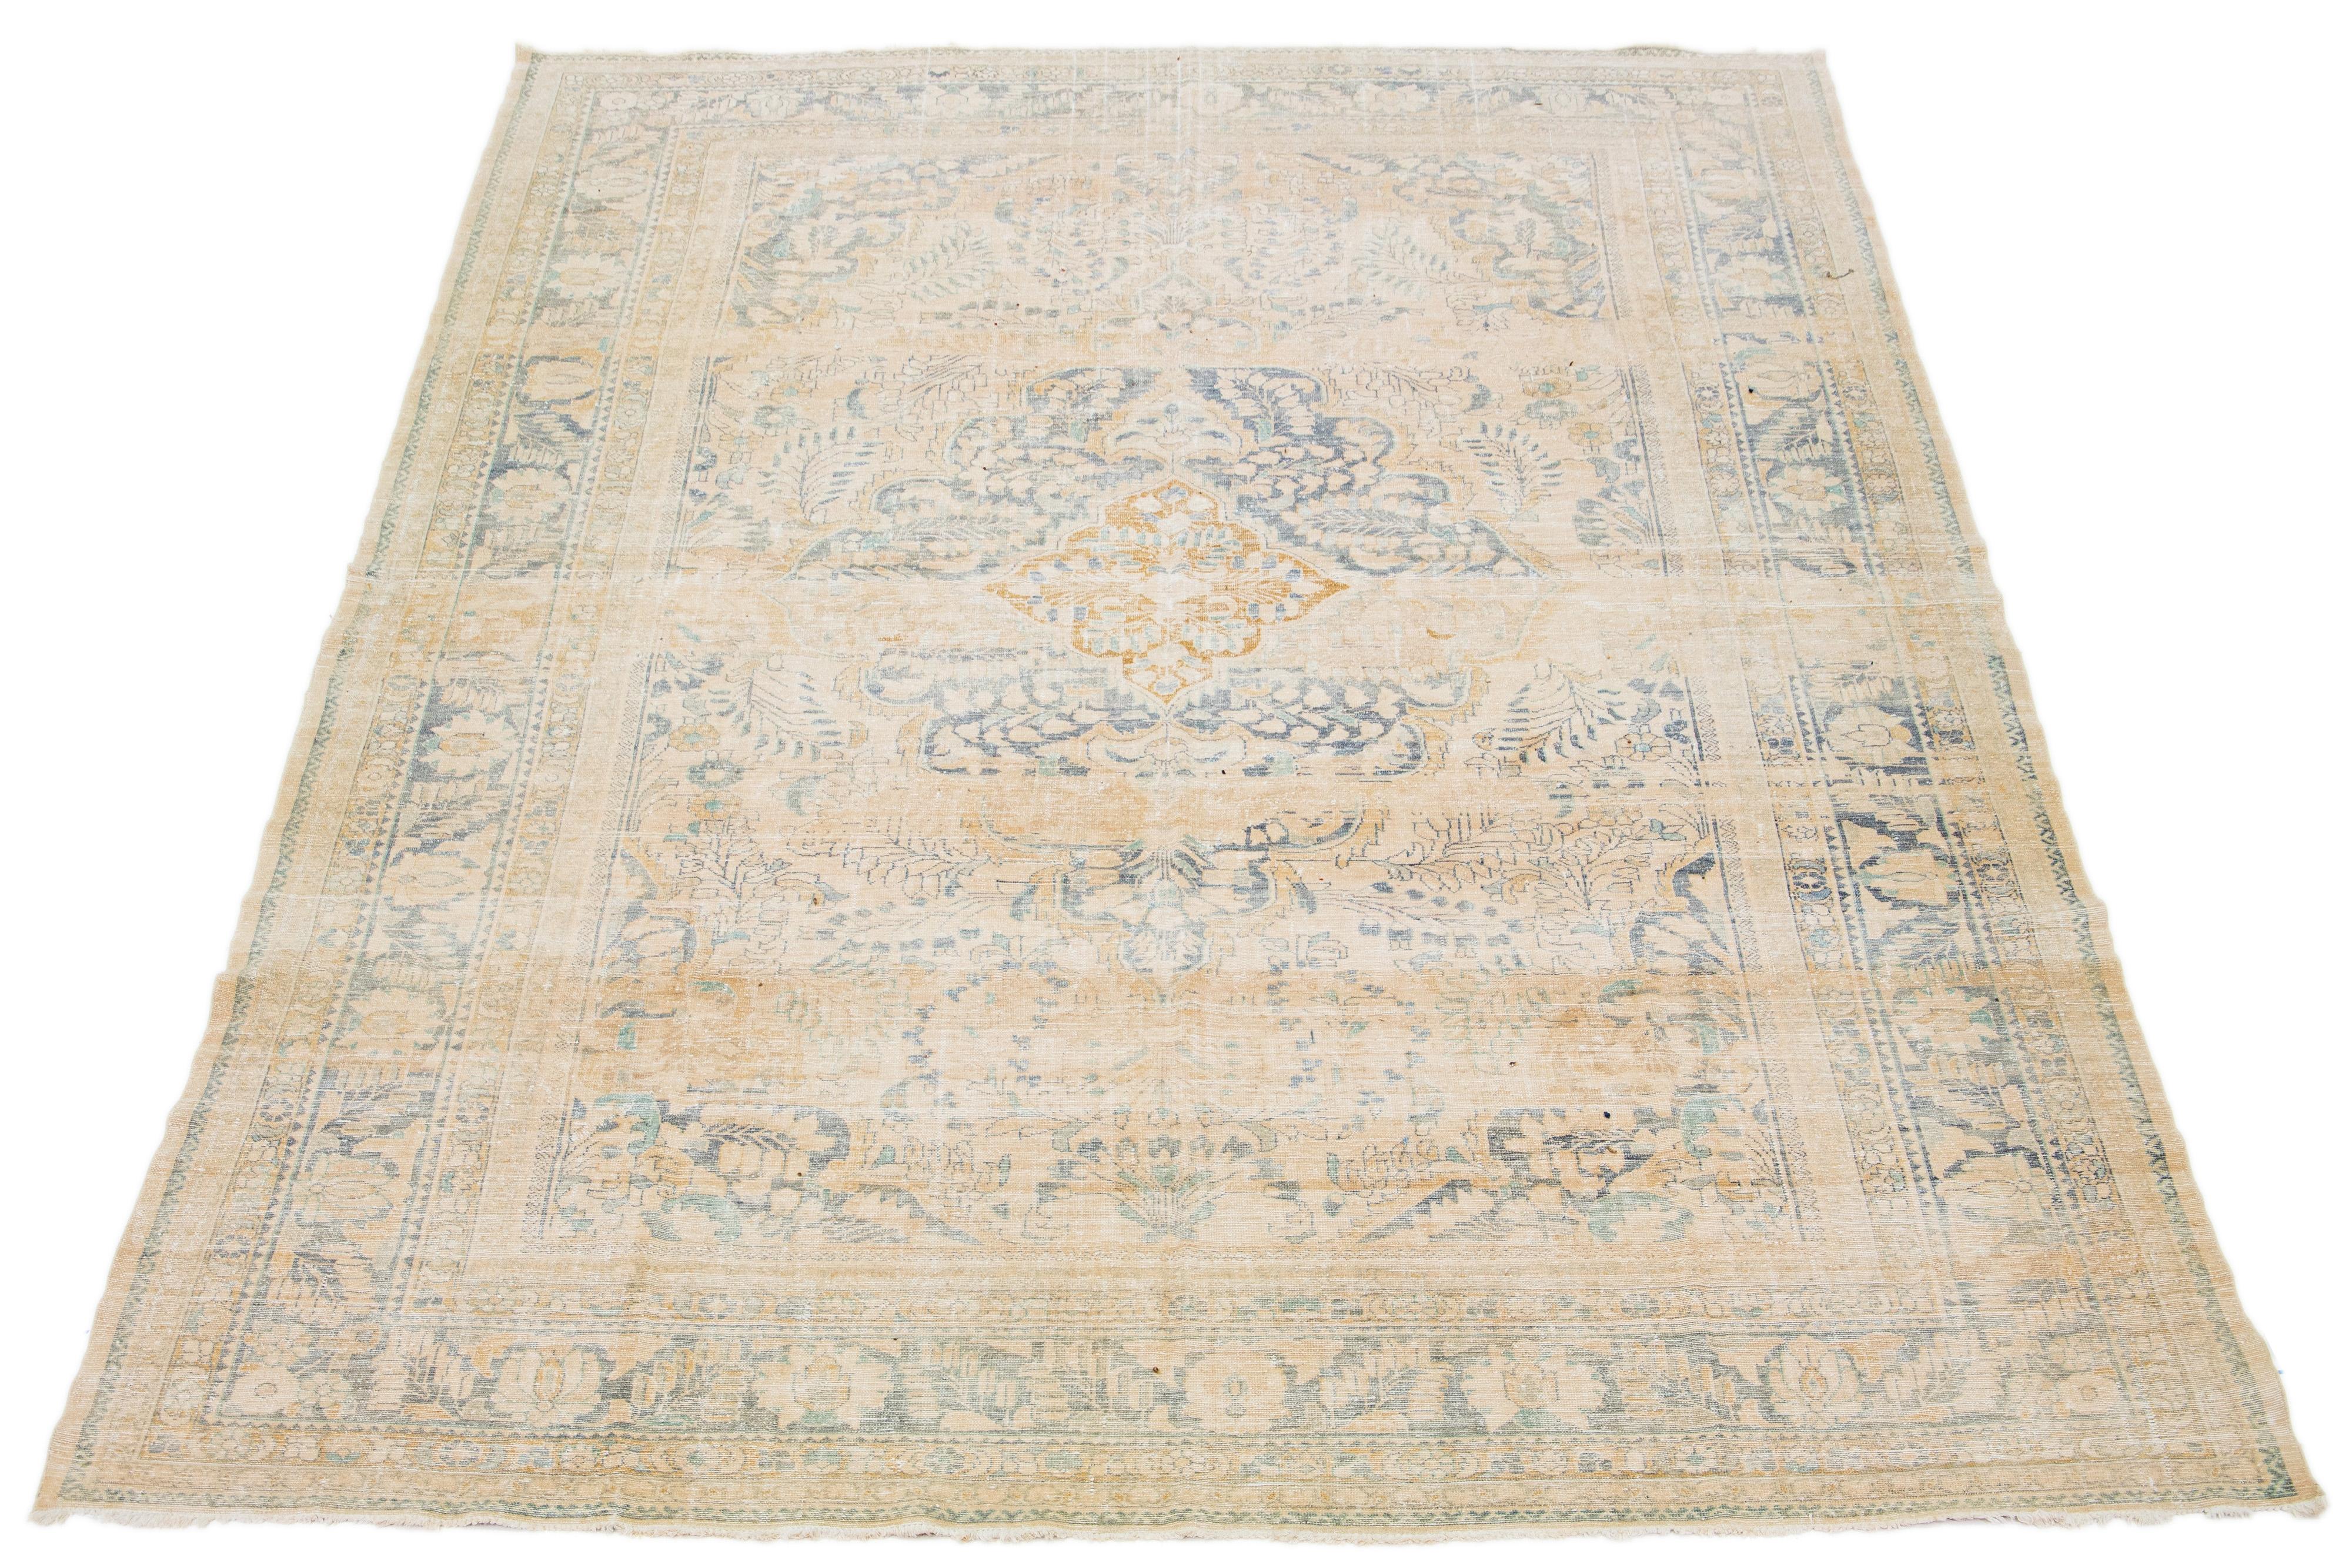 Beautiful room-size antique Malayer hand-knotted wool rug with a beige color field. This Persian rug has a gorgeous medallion design with blue accents.

This rug measures 10'4